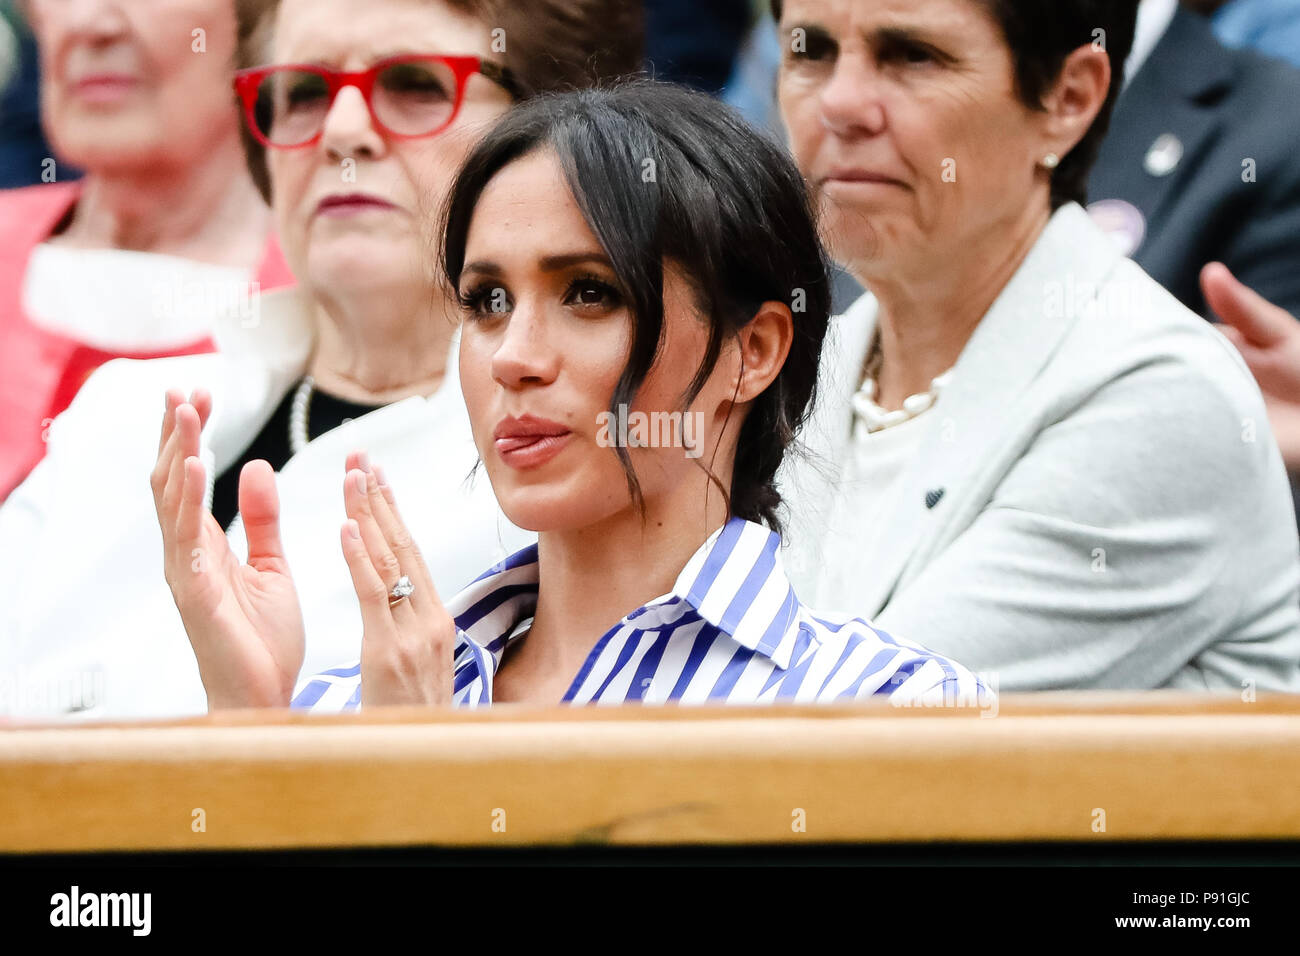 London, UK, 14th July 2018: Meghan, Duchess of Sussex, visiting the men's semifinal at day 12 at the Wimbledon Tennis Championships 2018 at the All England Lawn Tennis and Croquet Club in London. Credit: Frank Molter/Alamy Live news Stock Photo